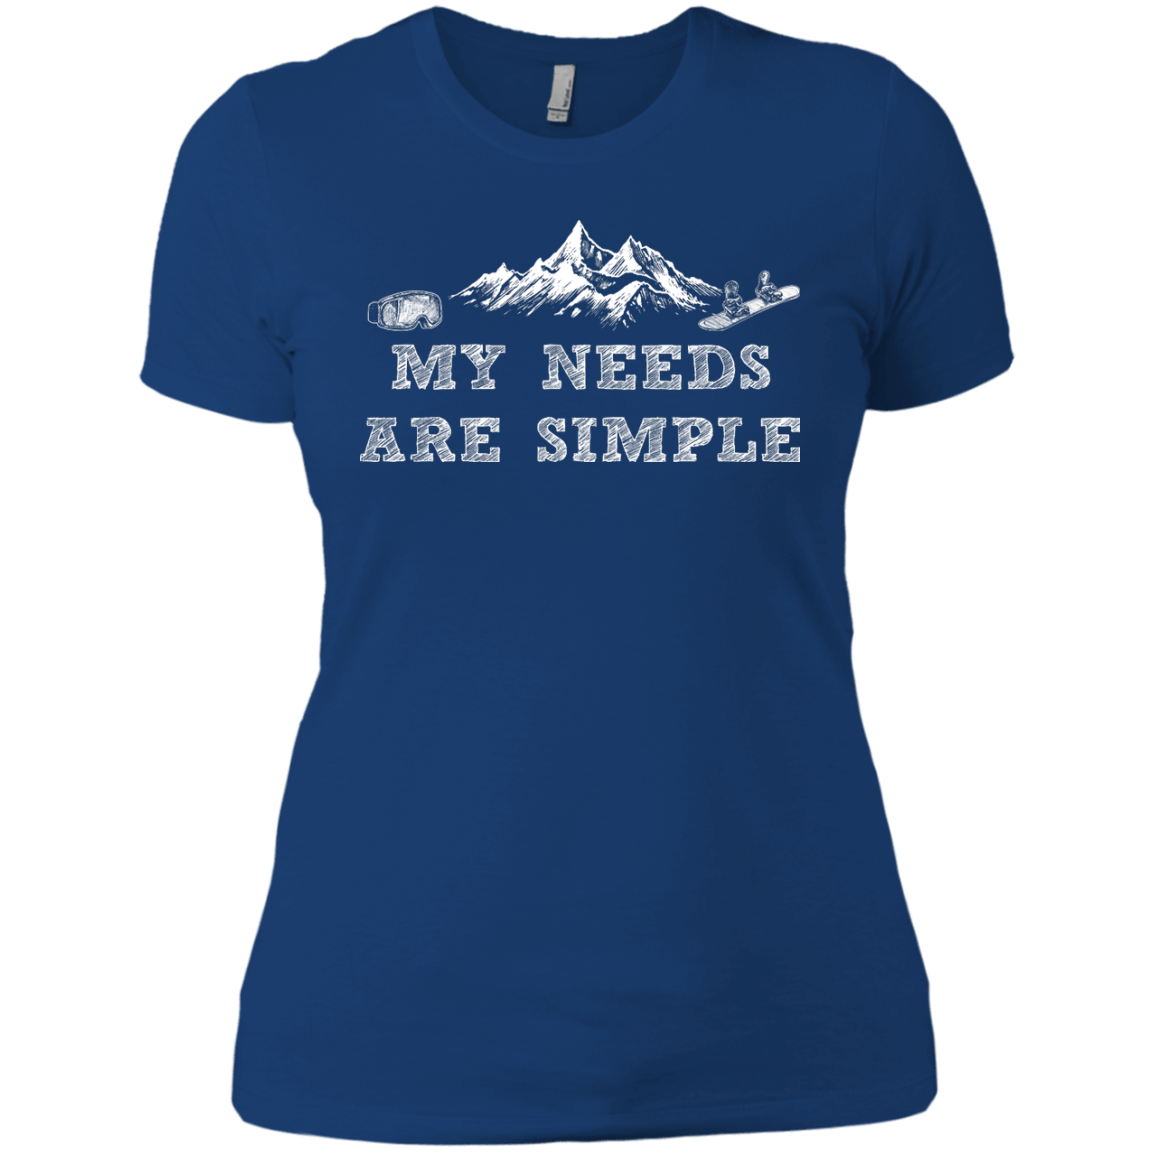 My Needs Are Simple - Snowboard Ladies Tees and V-Neck - Powderaddicts